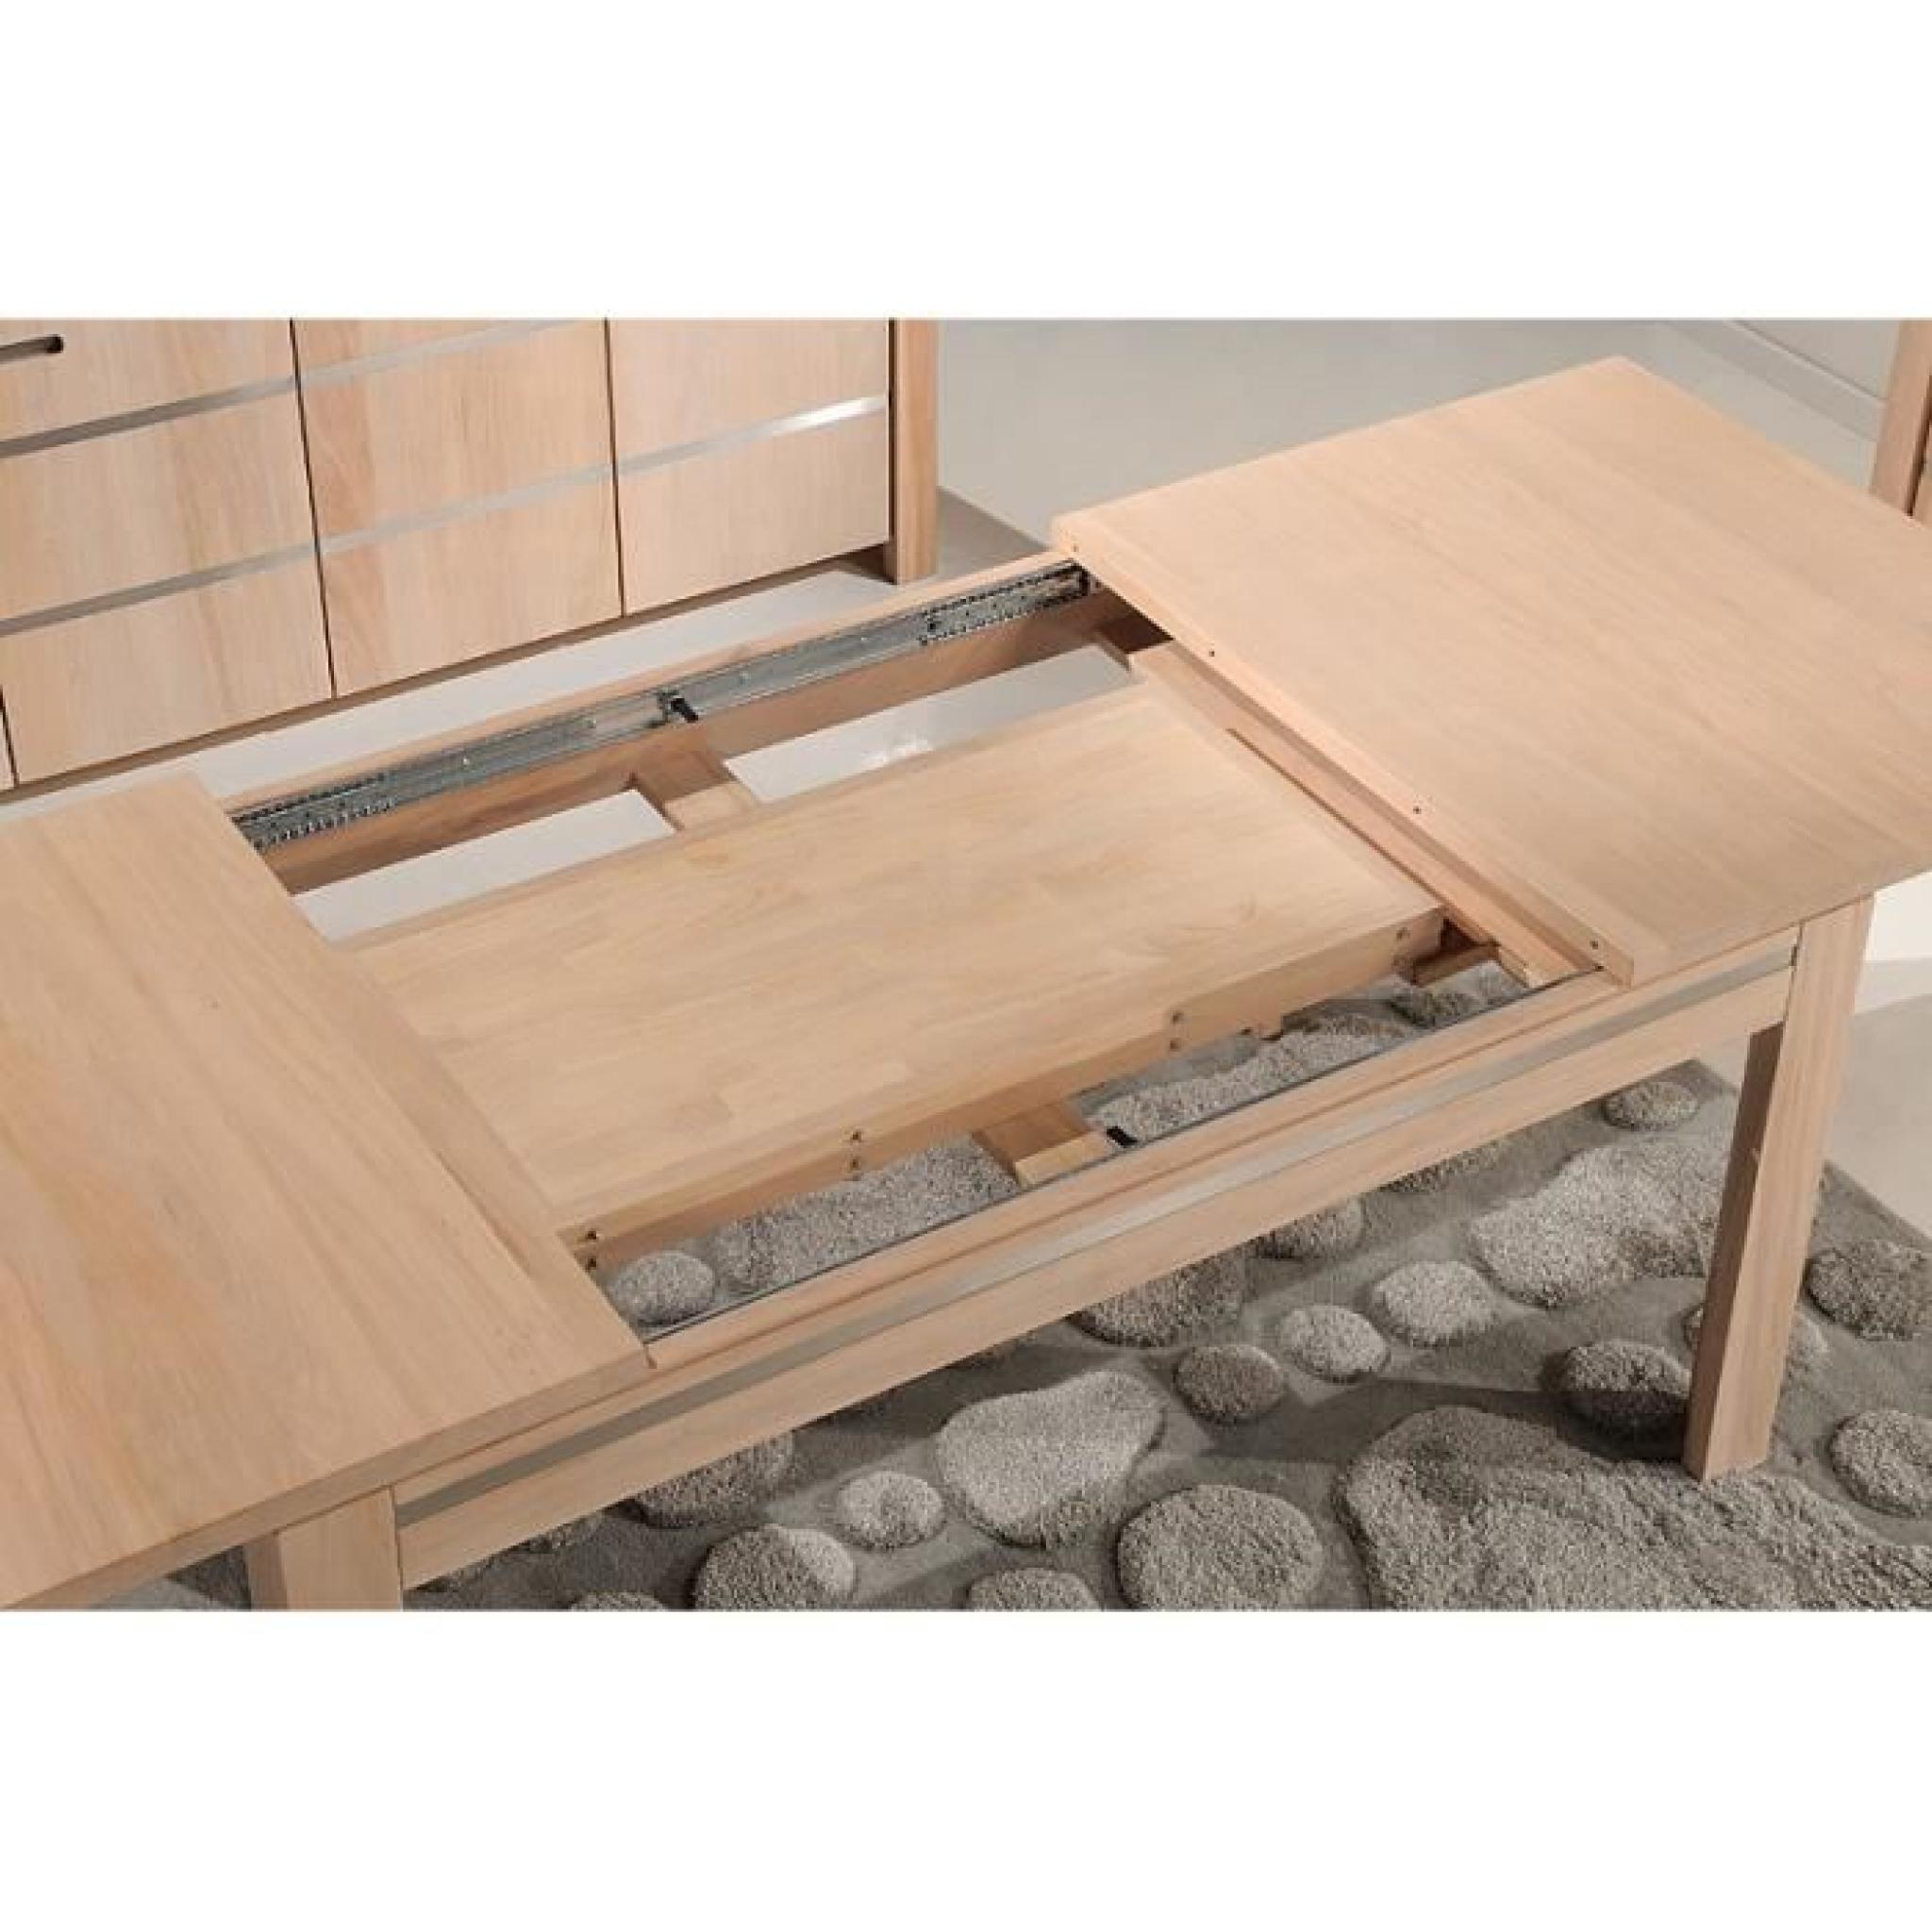 Table OPALE 180/95 ORME MASSIF-INOX (Orme - Orme - Wengé) pas cher